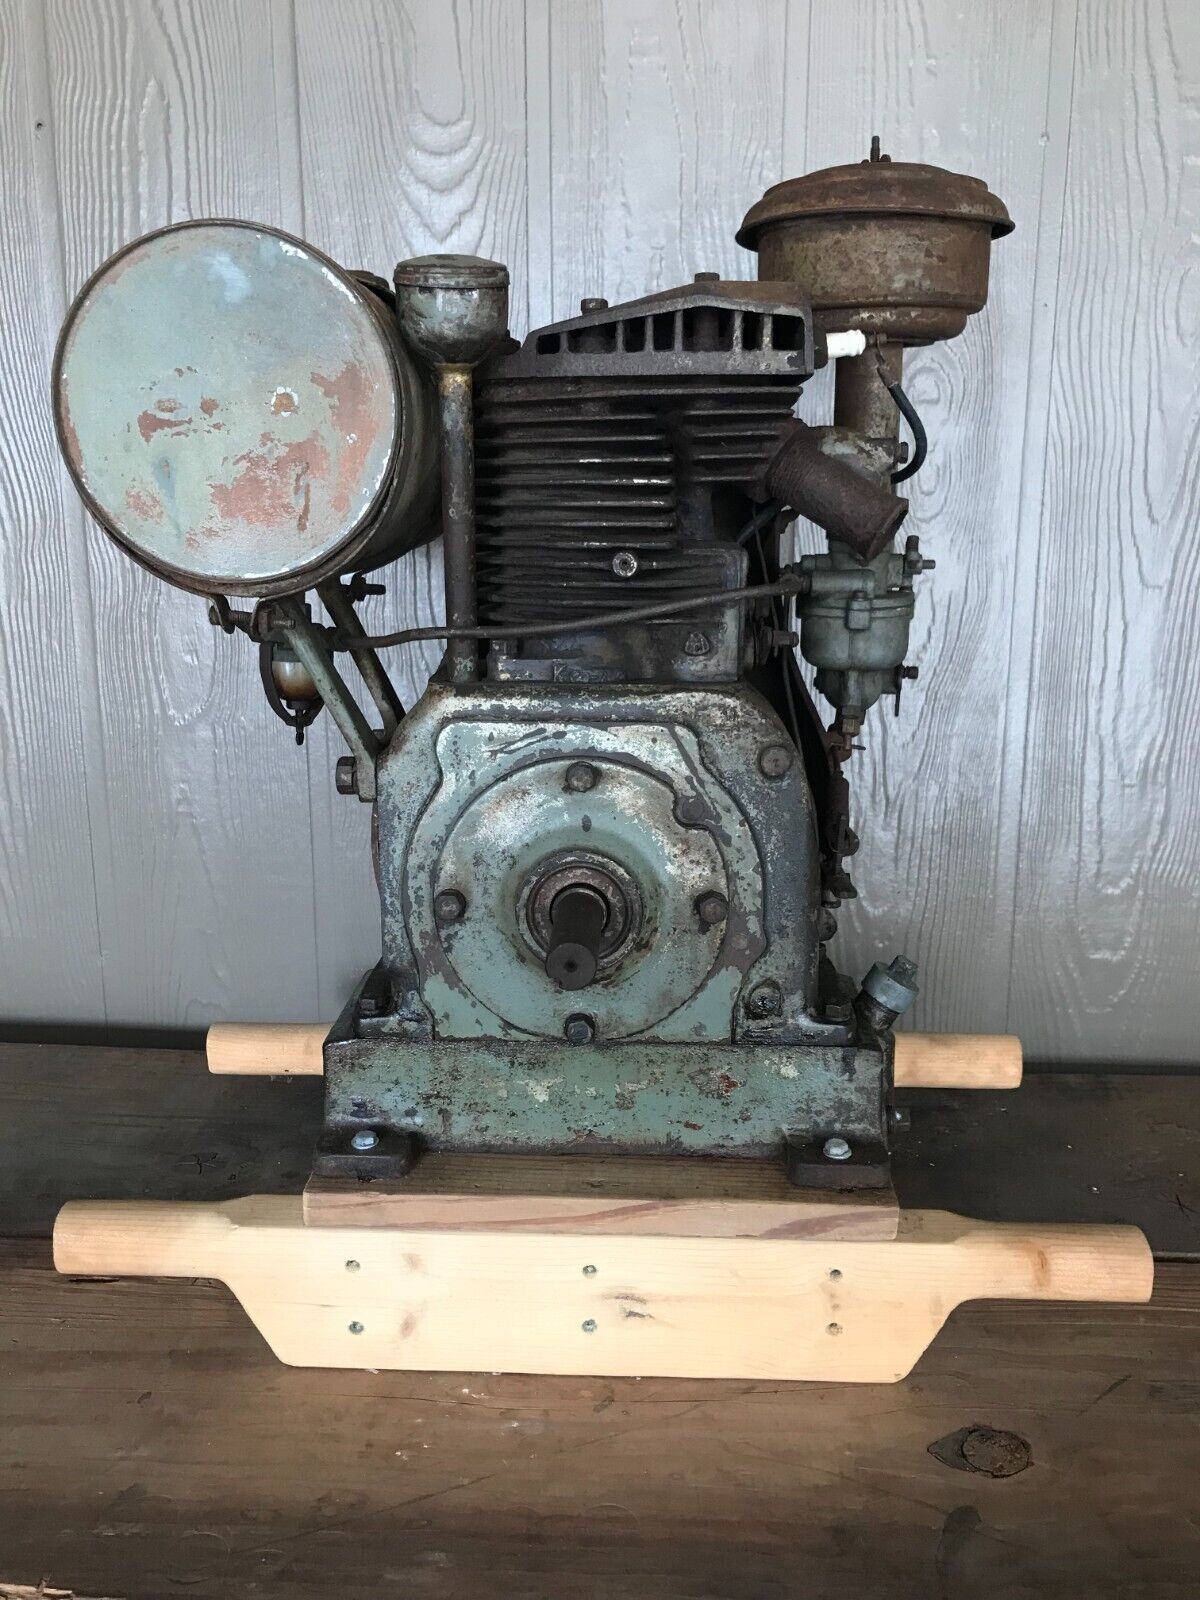 Vintage 1942 Briggs and Stratton Model Z Engine, Type 304326, SN: 78755 w/Manual